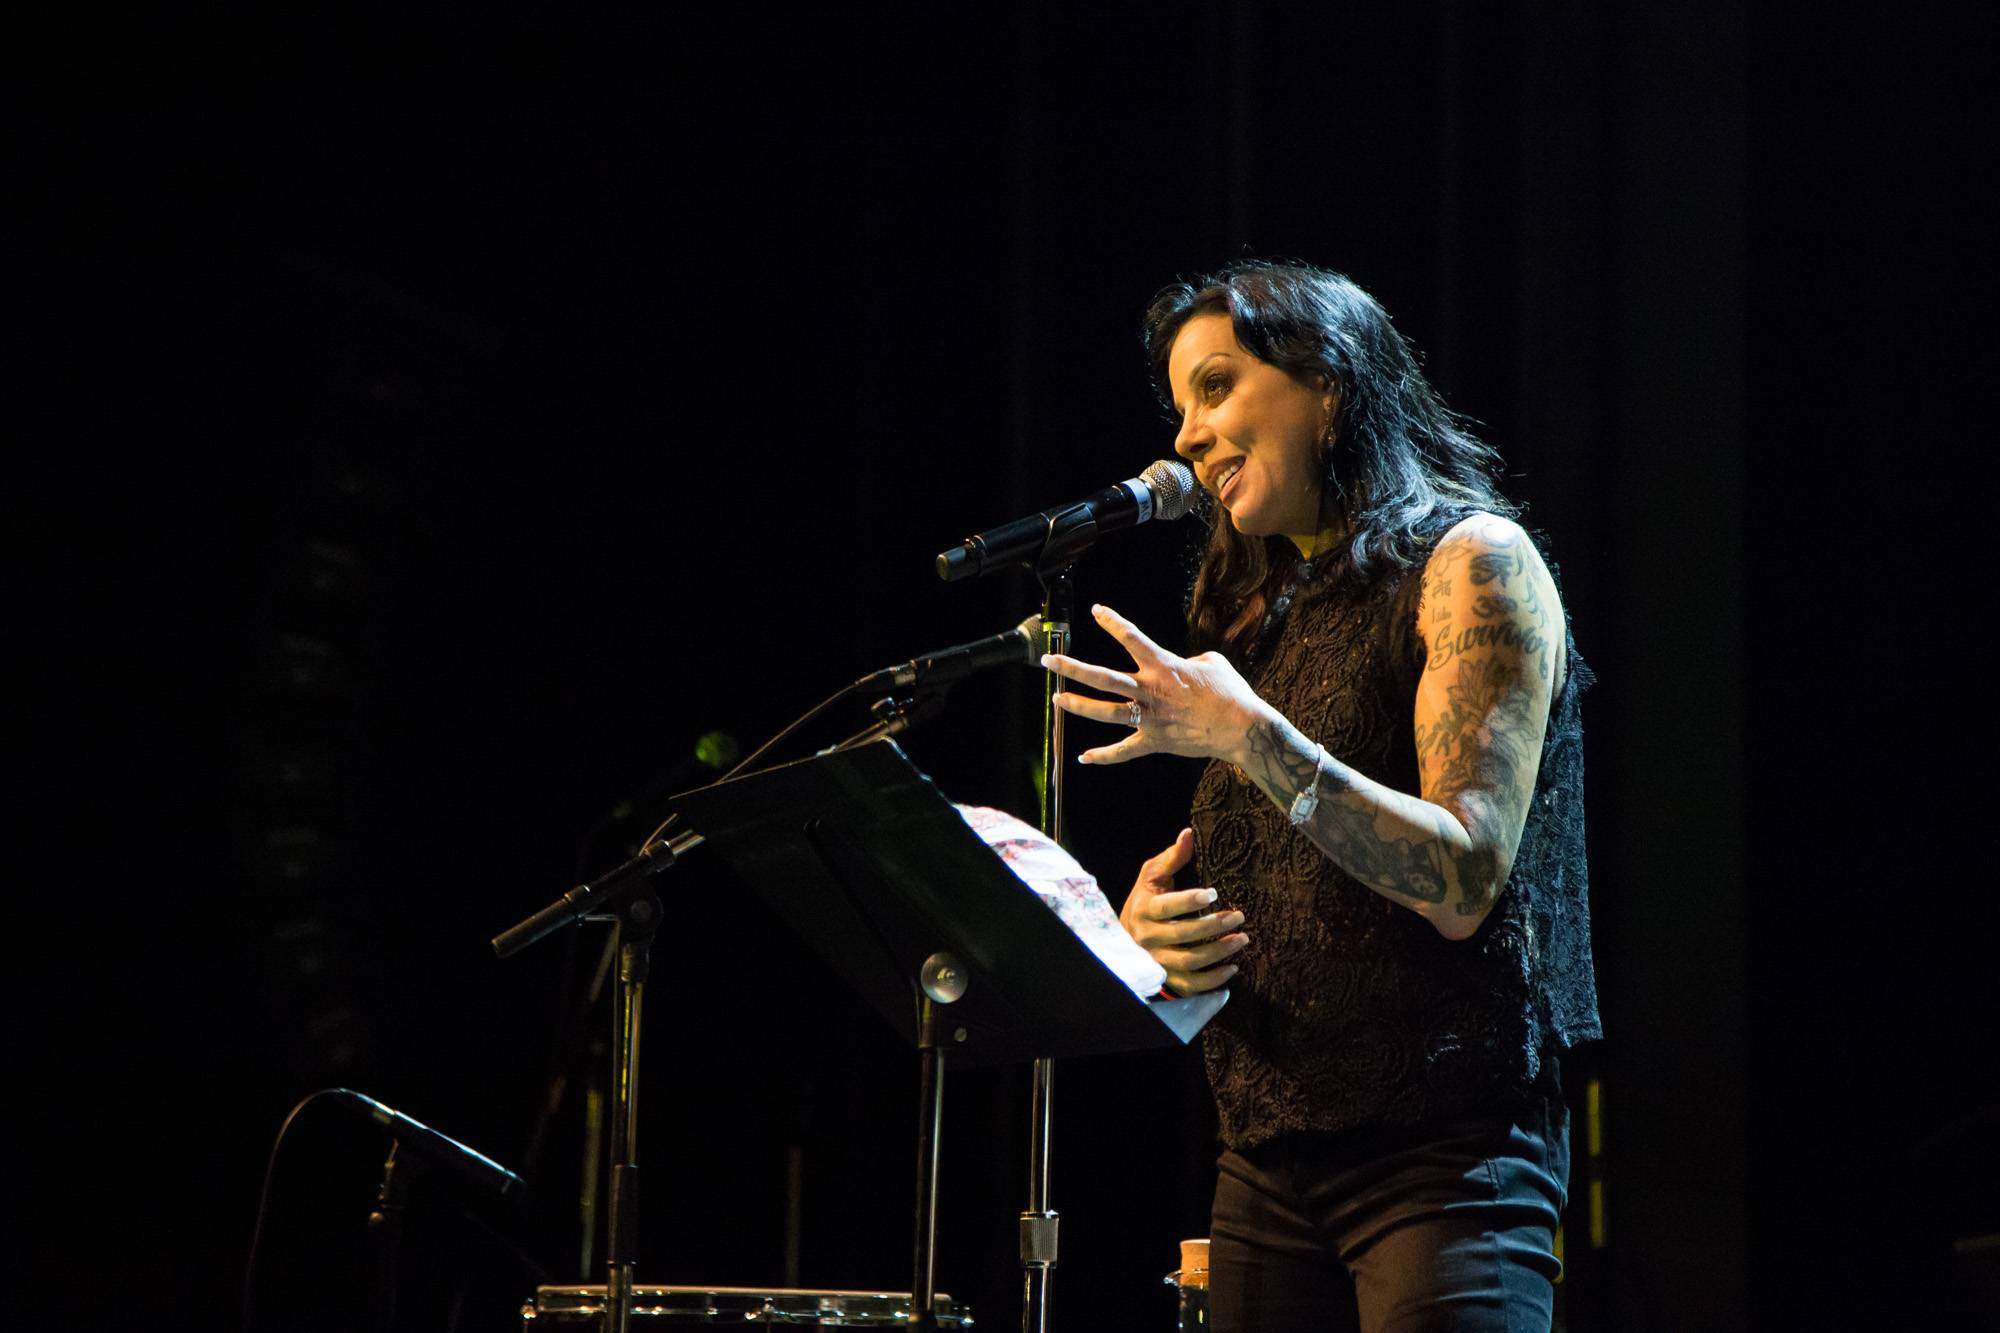 Bif Naked speaking at the Vogue Theatre, Vancouver, July 15 2017. Kirk Chantraine photo.